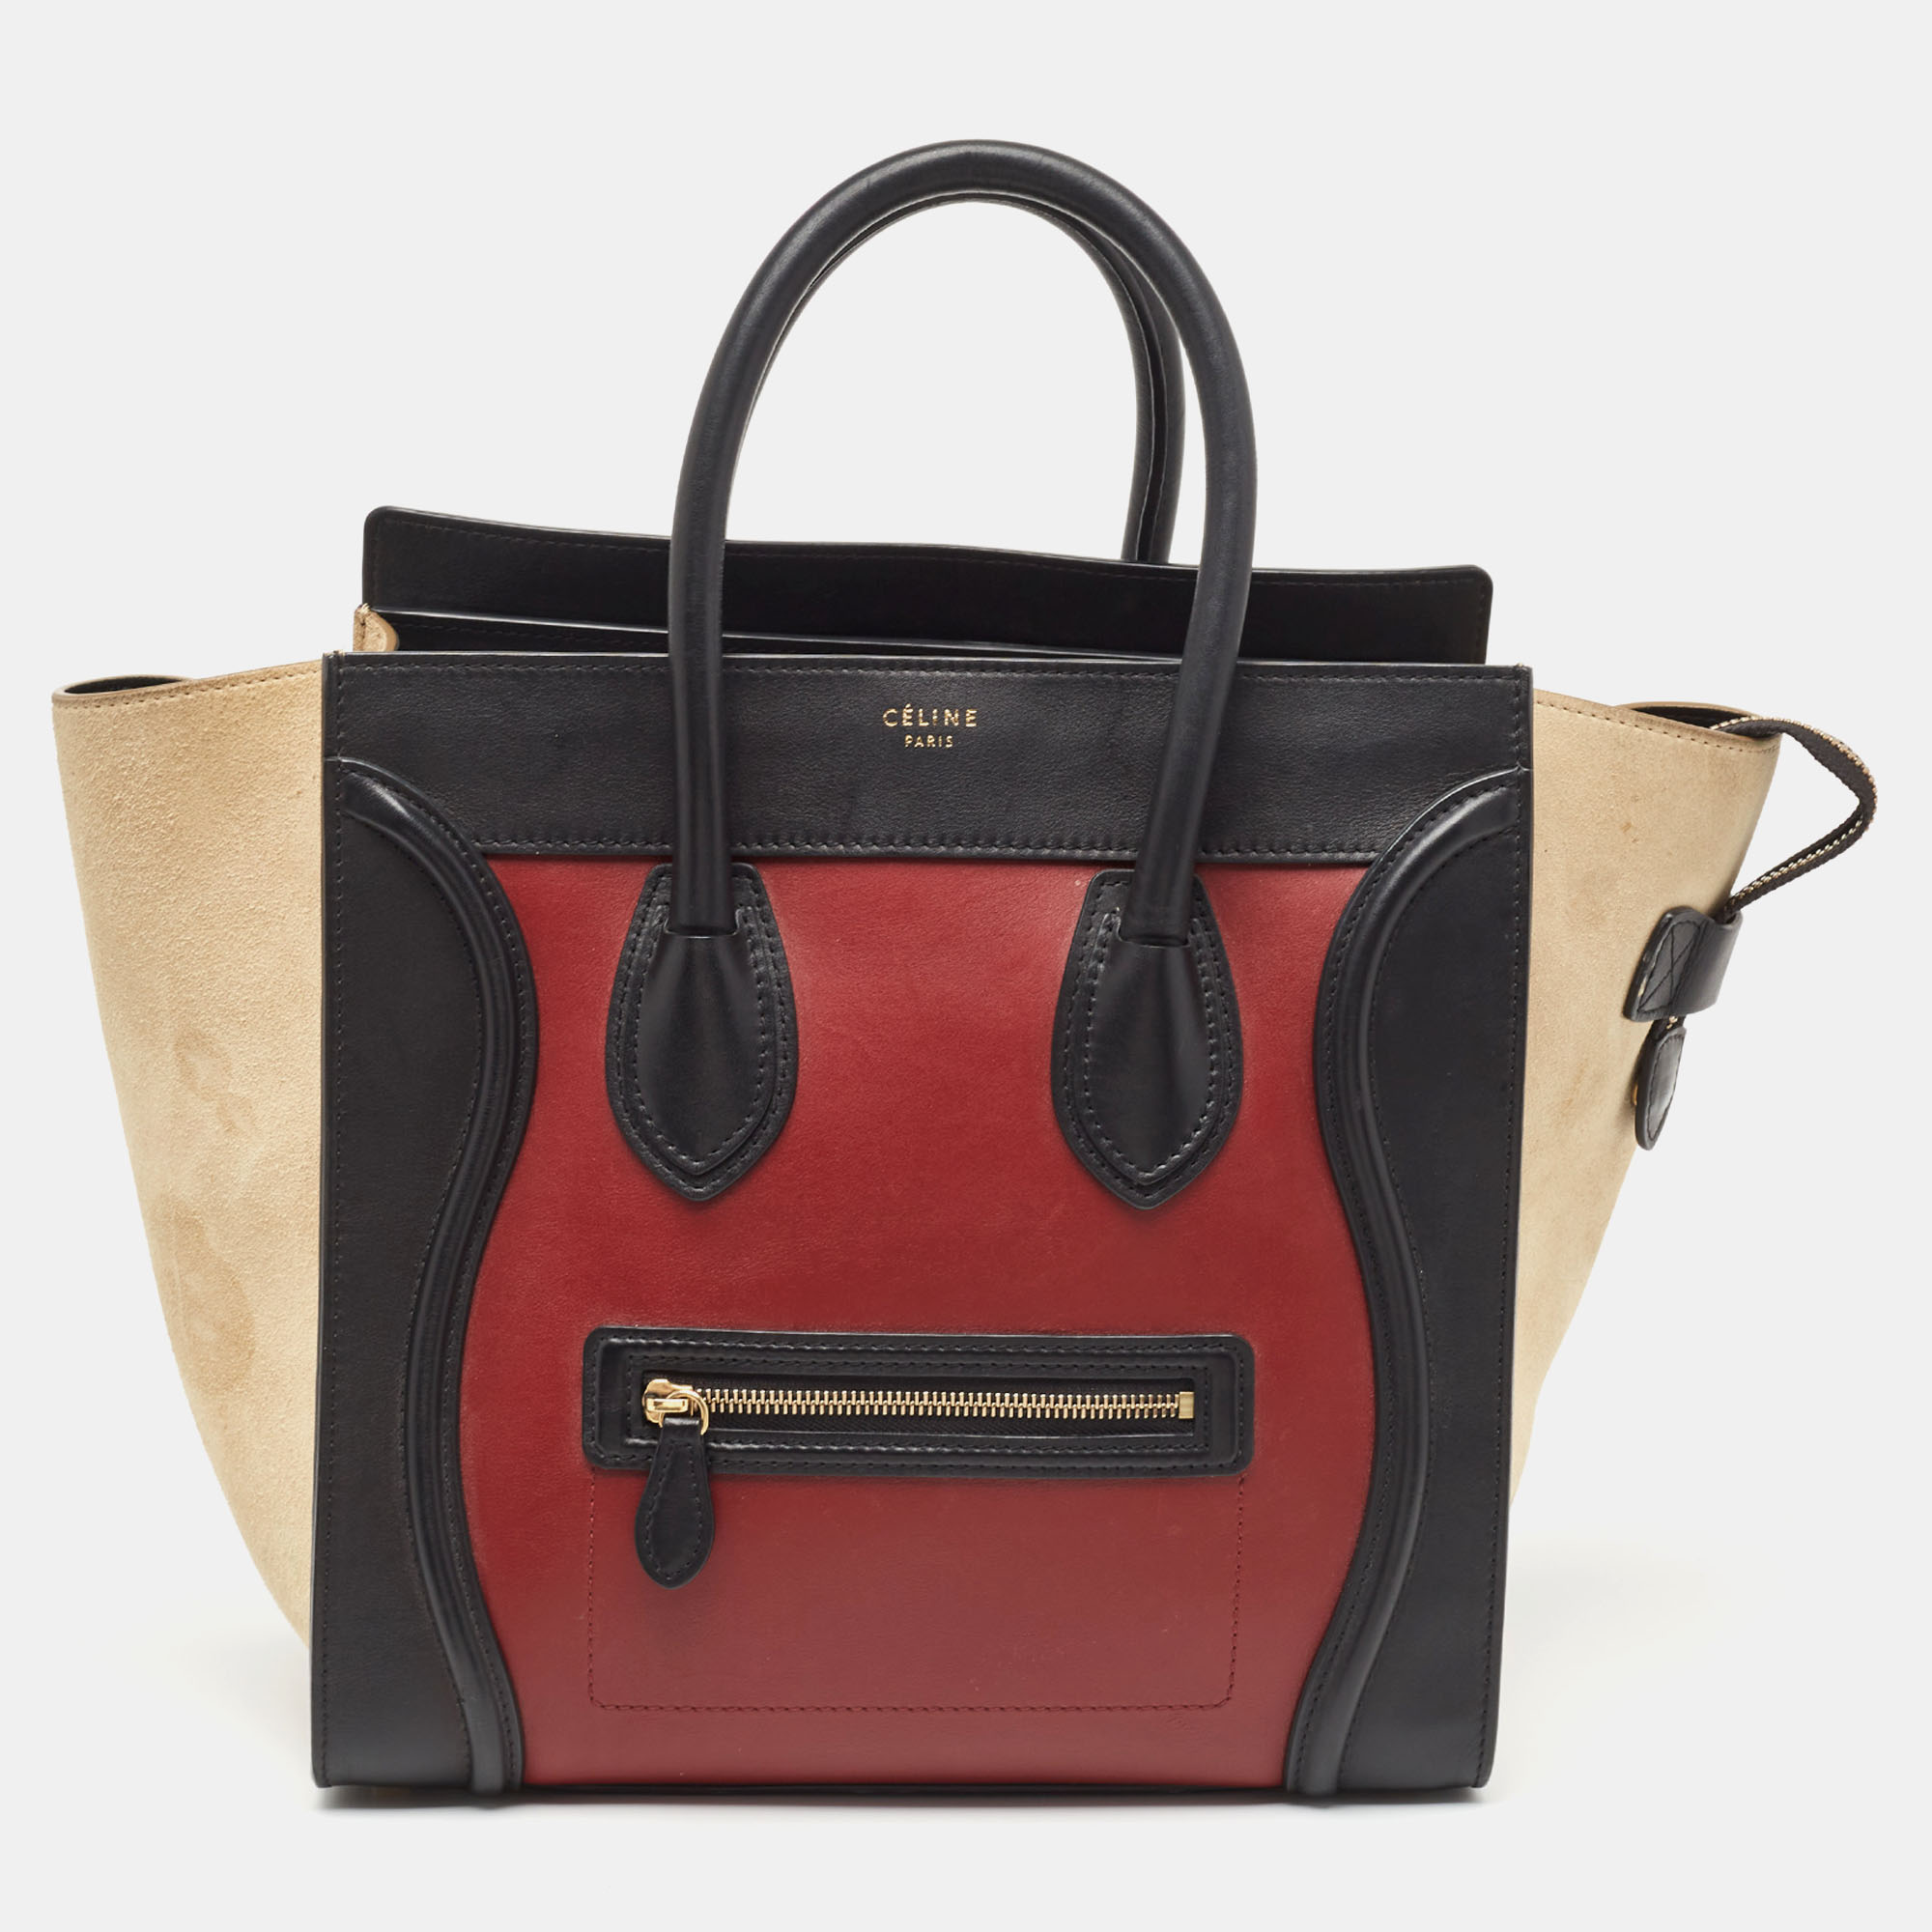 The Celine Luggage Tote exudes elegance with its harmonious blend of textures. Crafted with meticulous attention to detail it features luxurious leather and sumptuous suede in a tasteful tricolor design. Its compact size belies its ample capacity making it both a stylish accessory and a practical companion for any occasion.